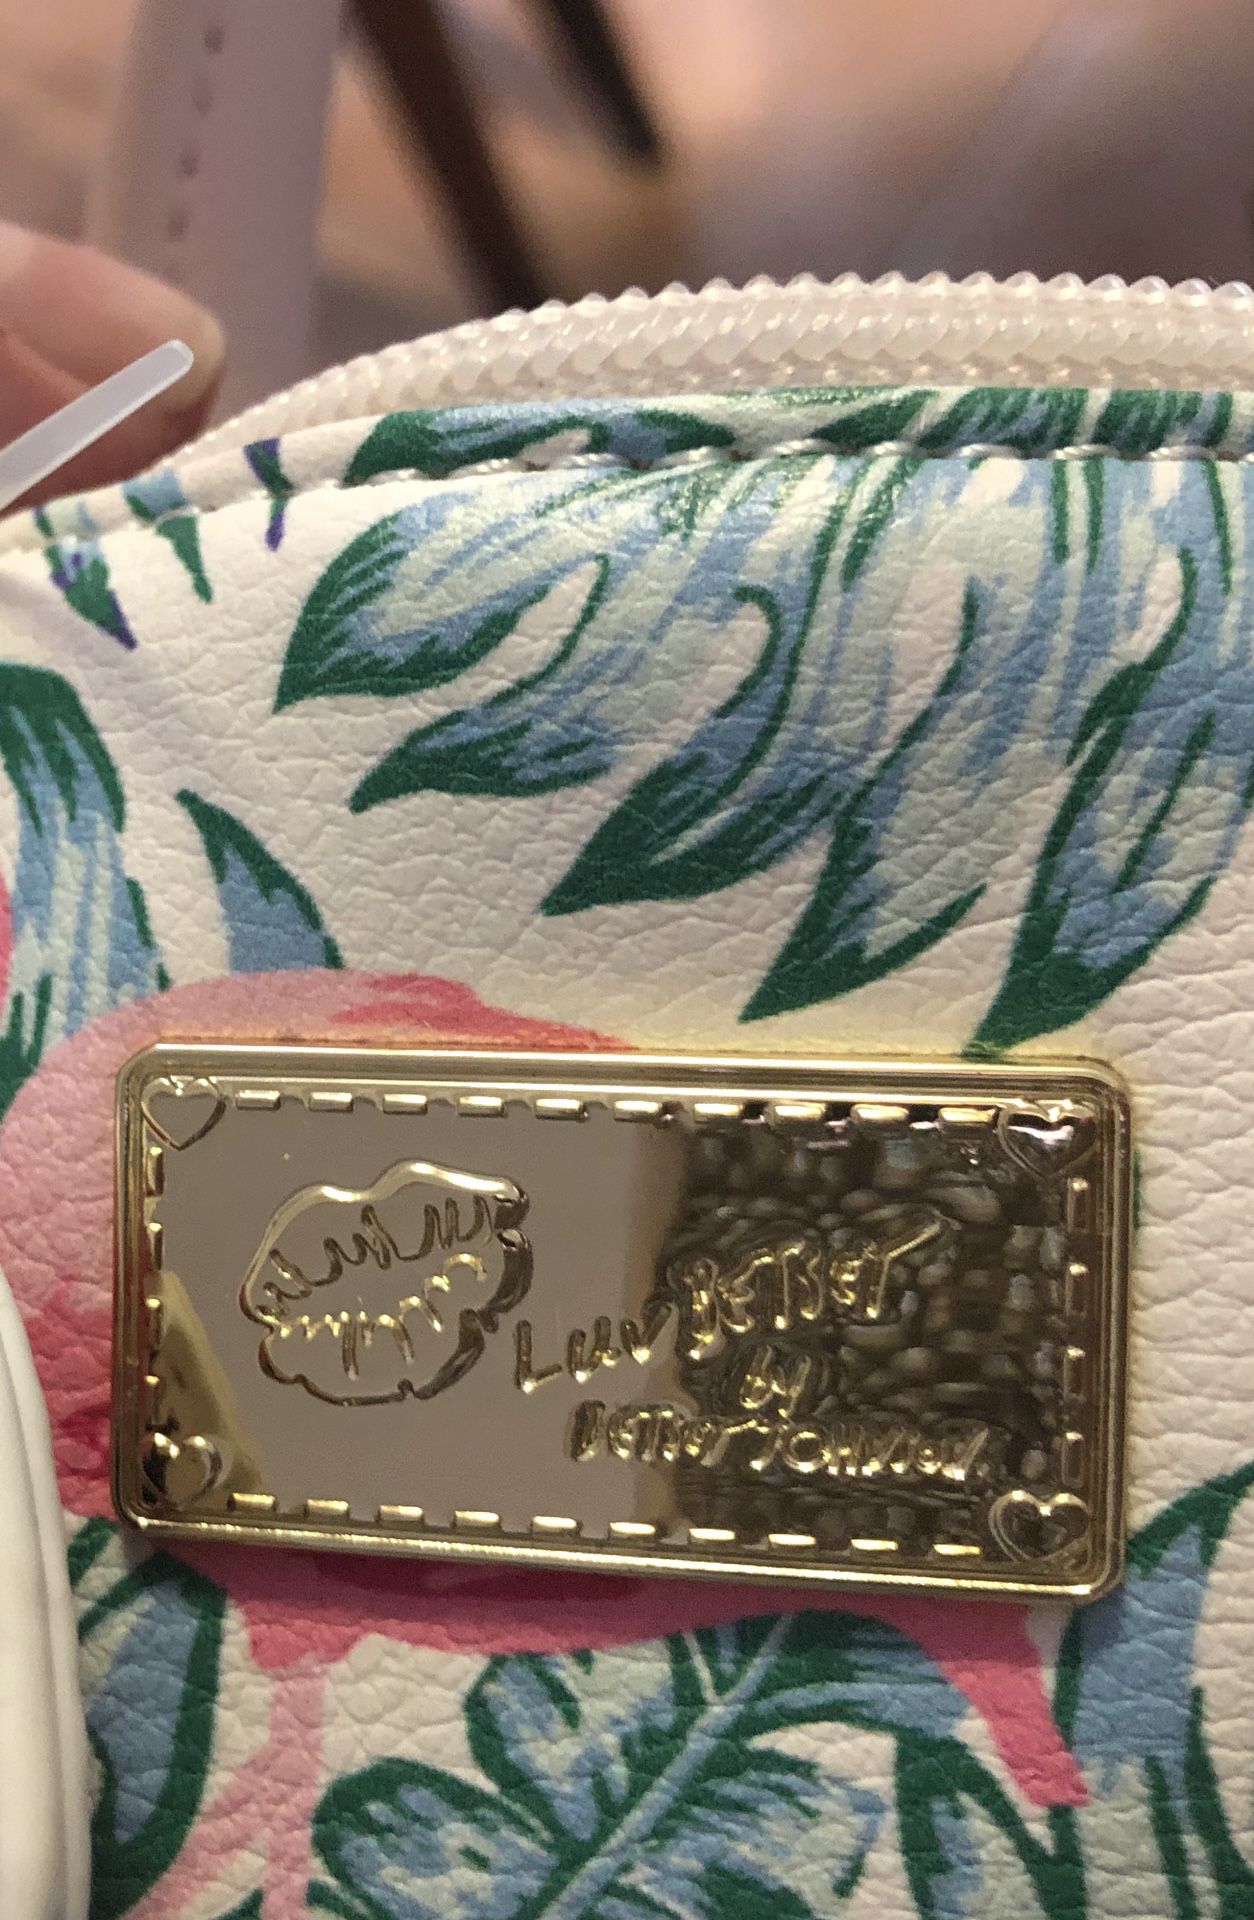 BETSEY JOHNSON Heart Monogram Bag for Sale in Albuquerque, NM - OfferUp